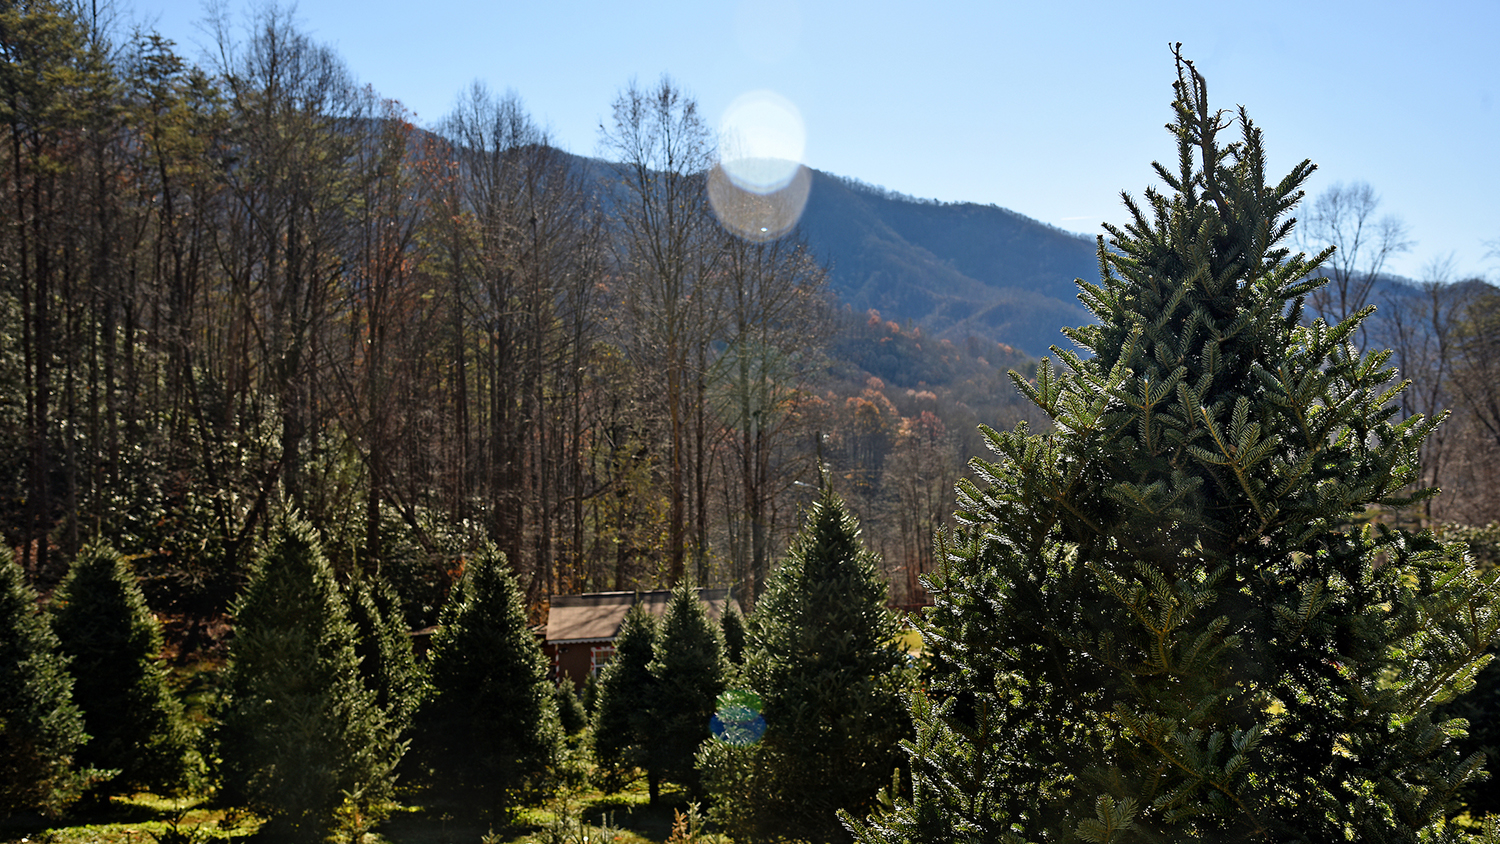 Christmas tree farm in North Carolina - UAVs and Christmas Trees: New Research to Help NC Growers Benefit From Drone Technology - Forestry and Environmental Resources NC State University